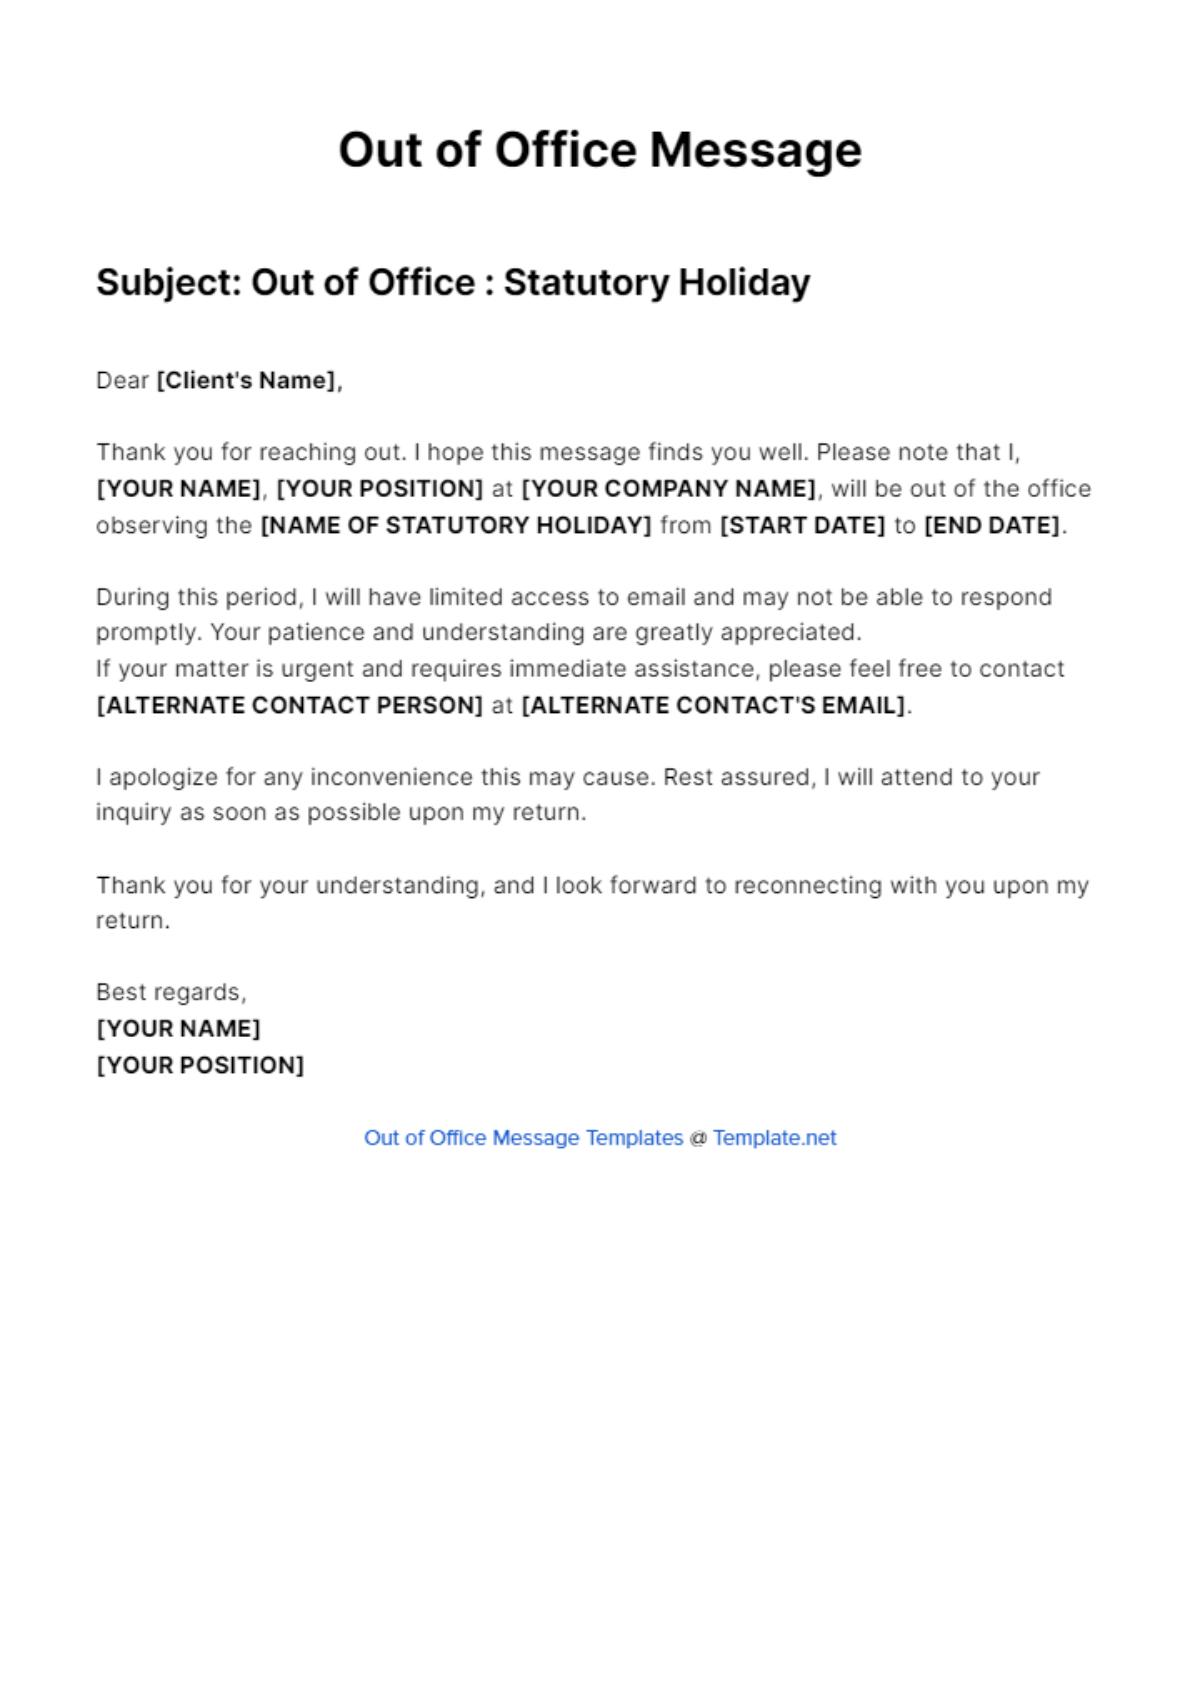 Out Of Office Message For Statutory Holiday Template